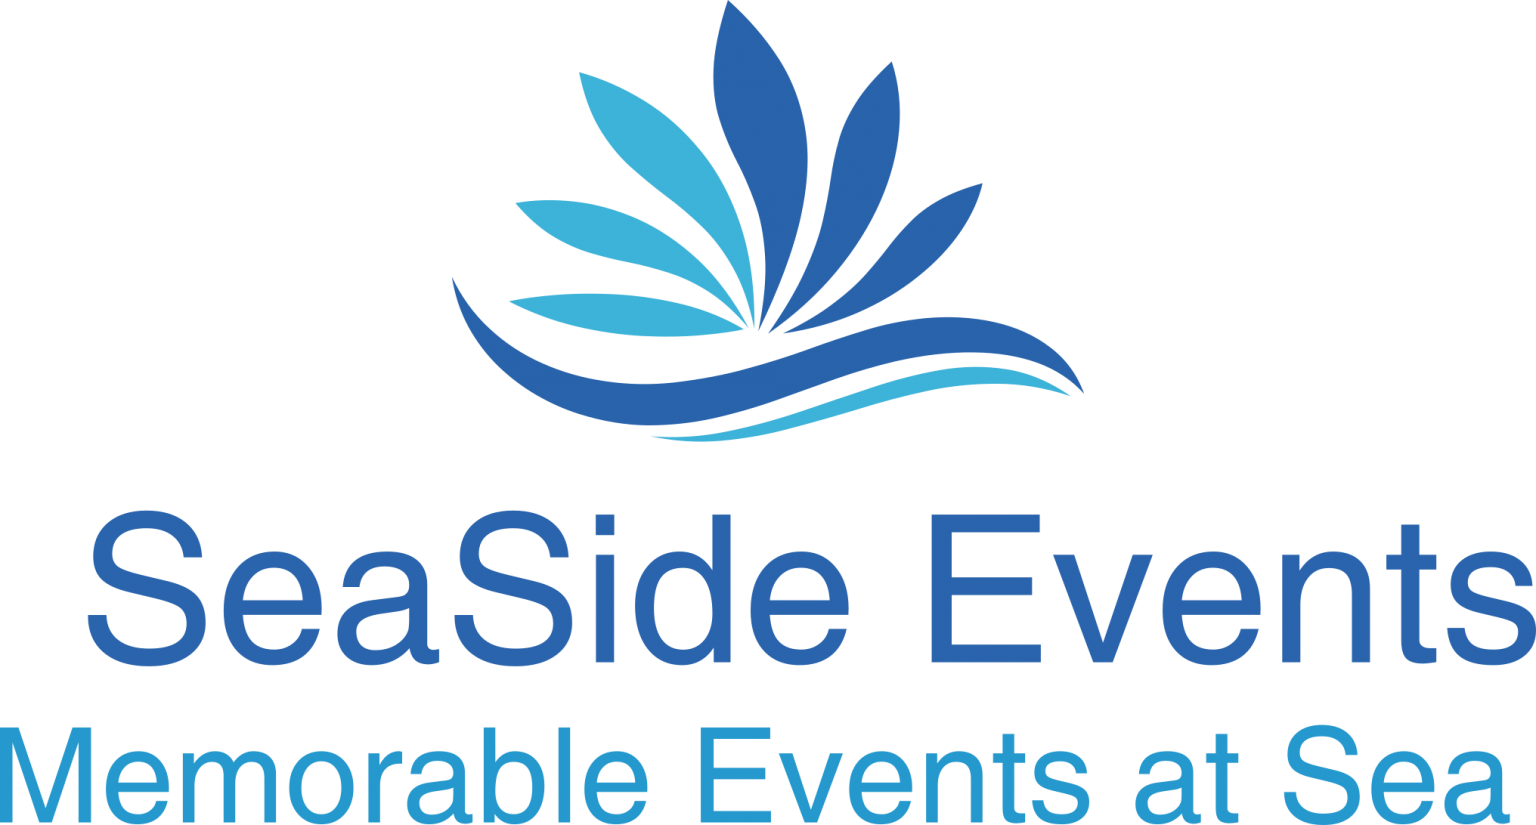 SeaSide Events A site for SeaSide Events